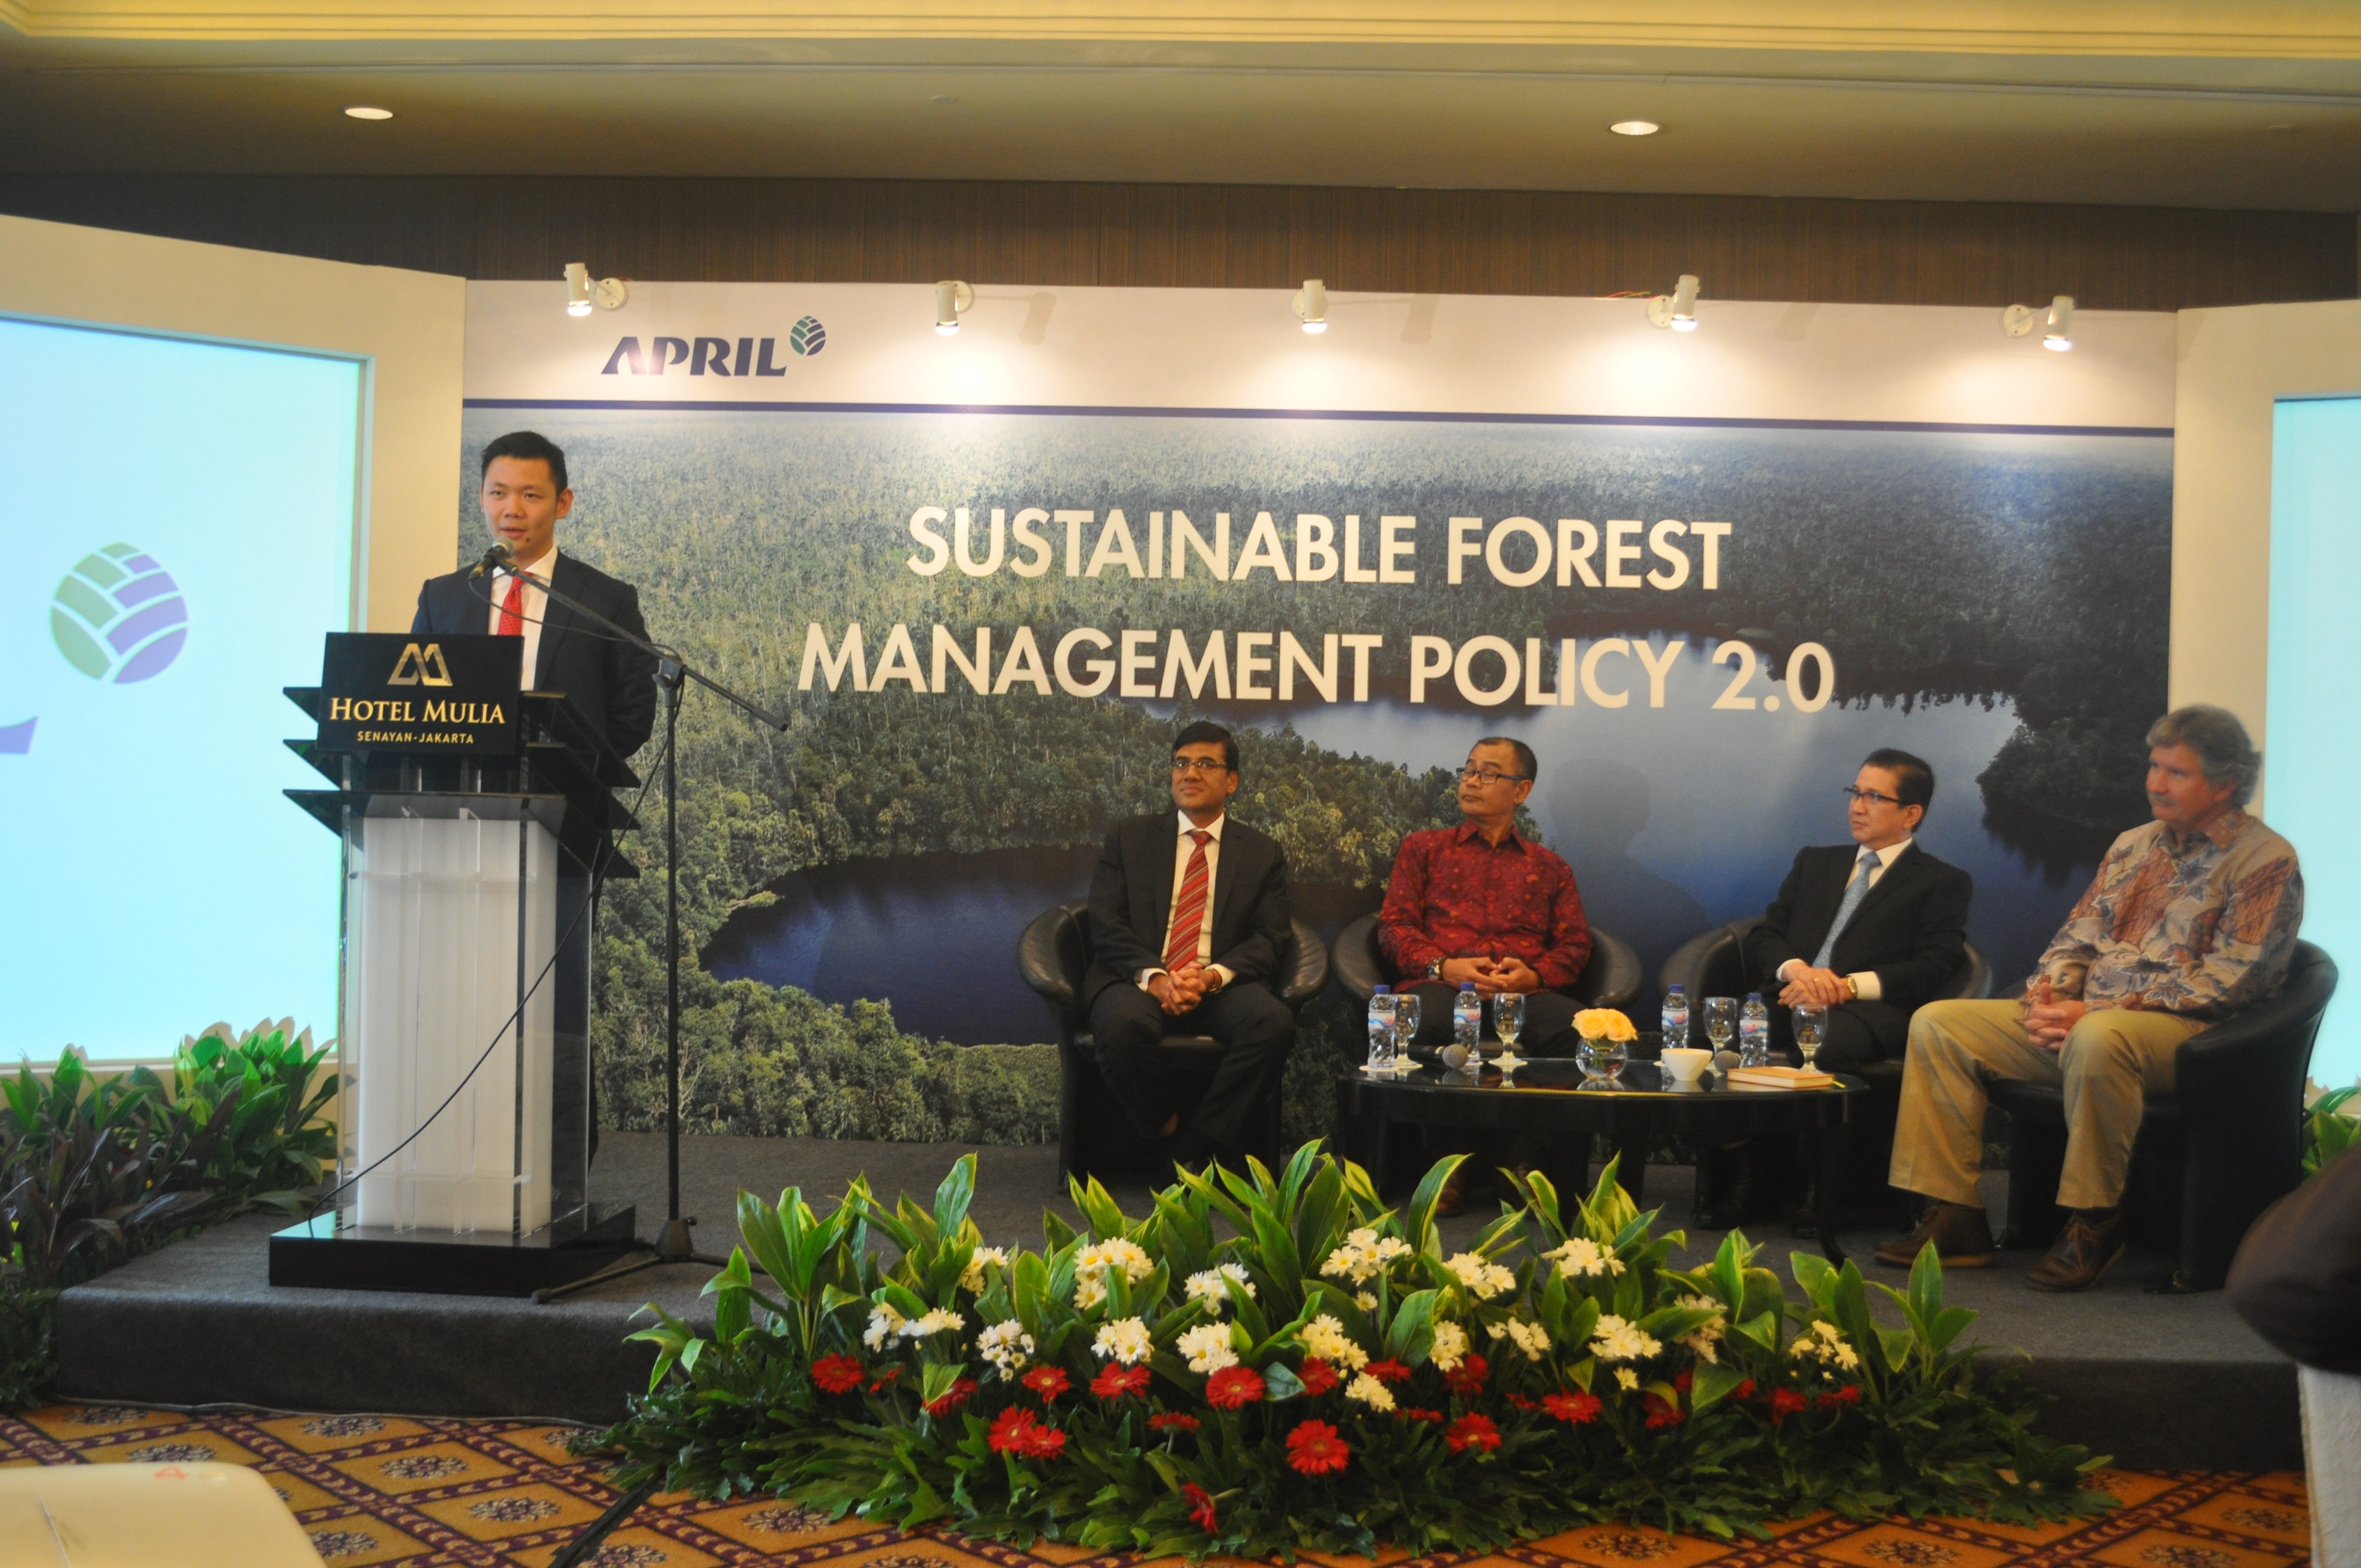 Anderson Tanoto speaks at the SFMP 2.0 event